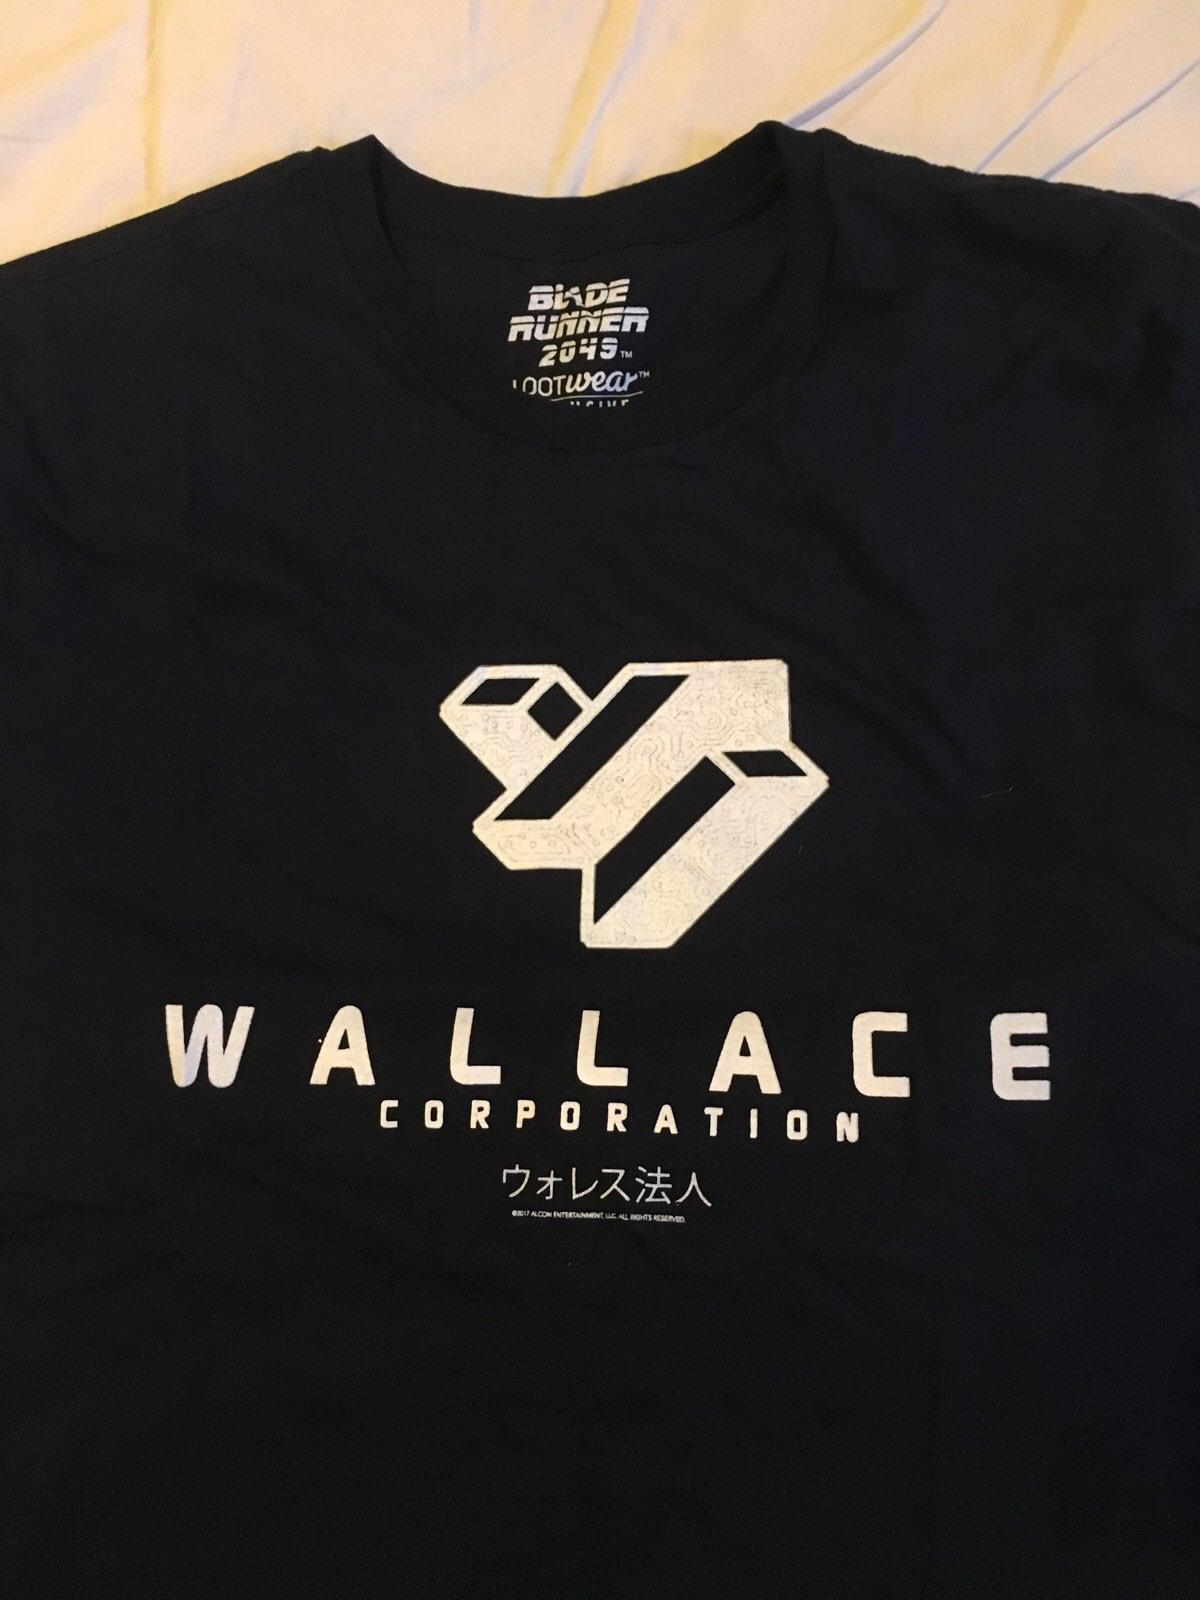 Wallace Logo - Does anyone know why the Wallace Corp logo is like this? In